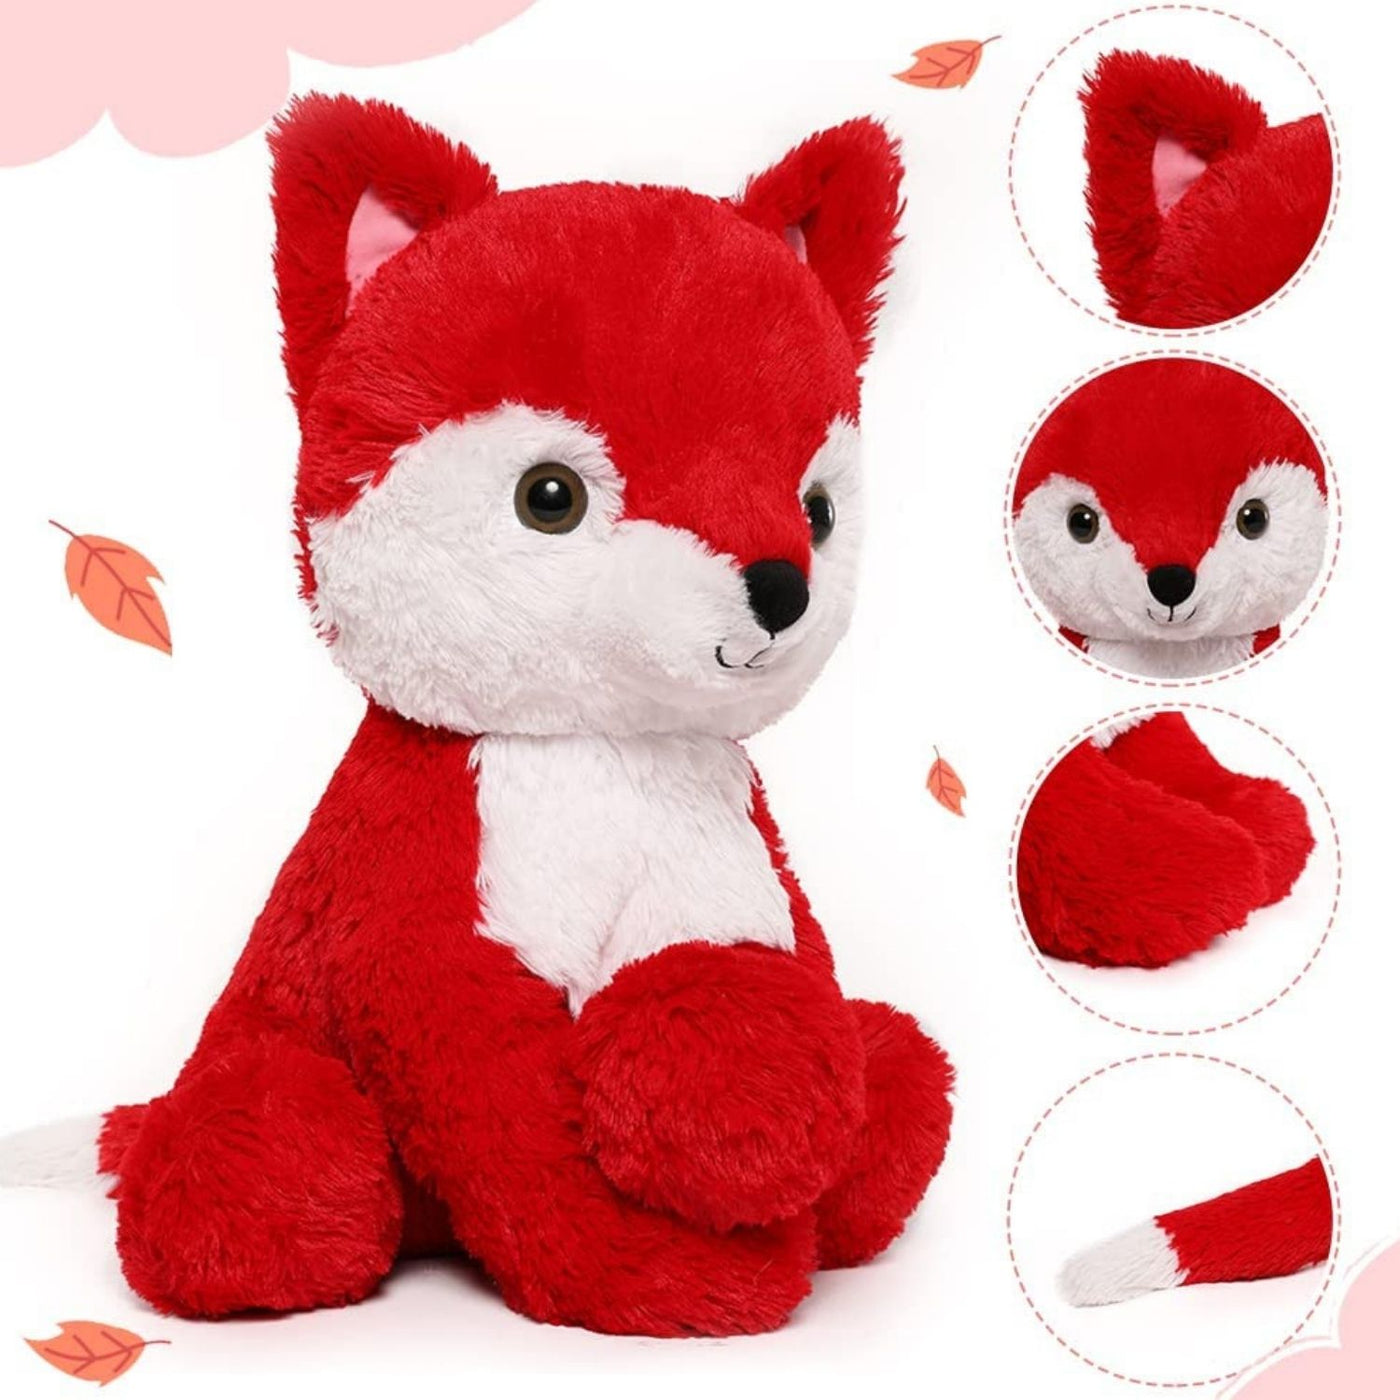 Fox Plush Toy Stuffed Animal Toy, Red, 18 Inches